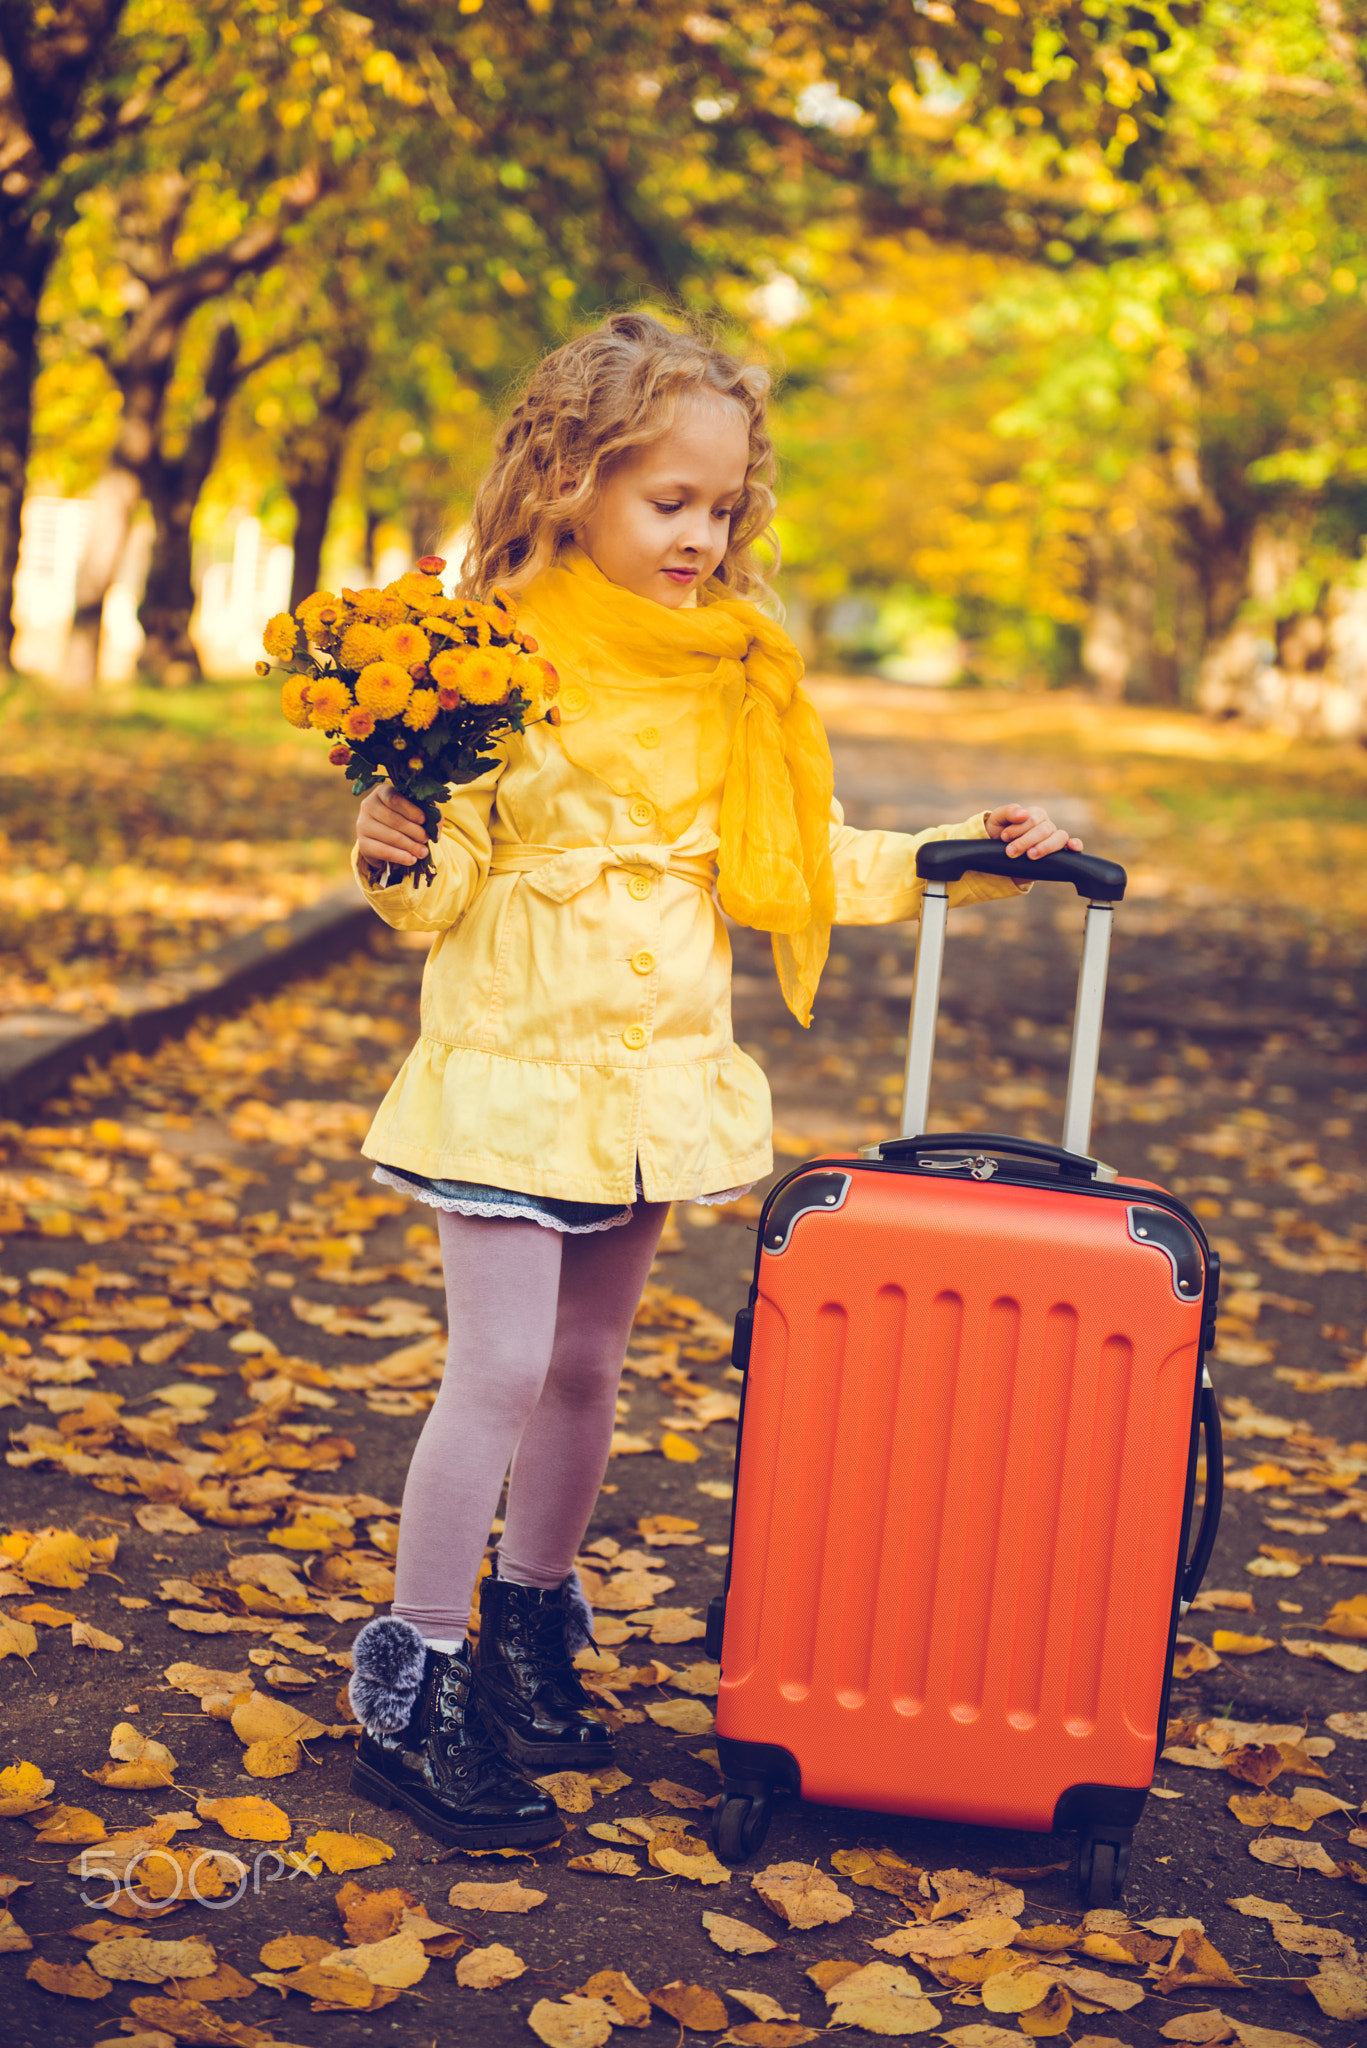 Little girl with blond hair in autumn background